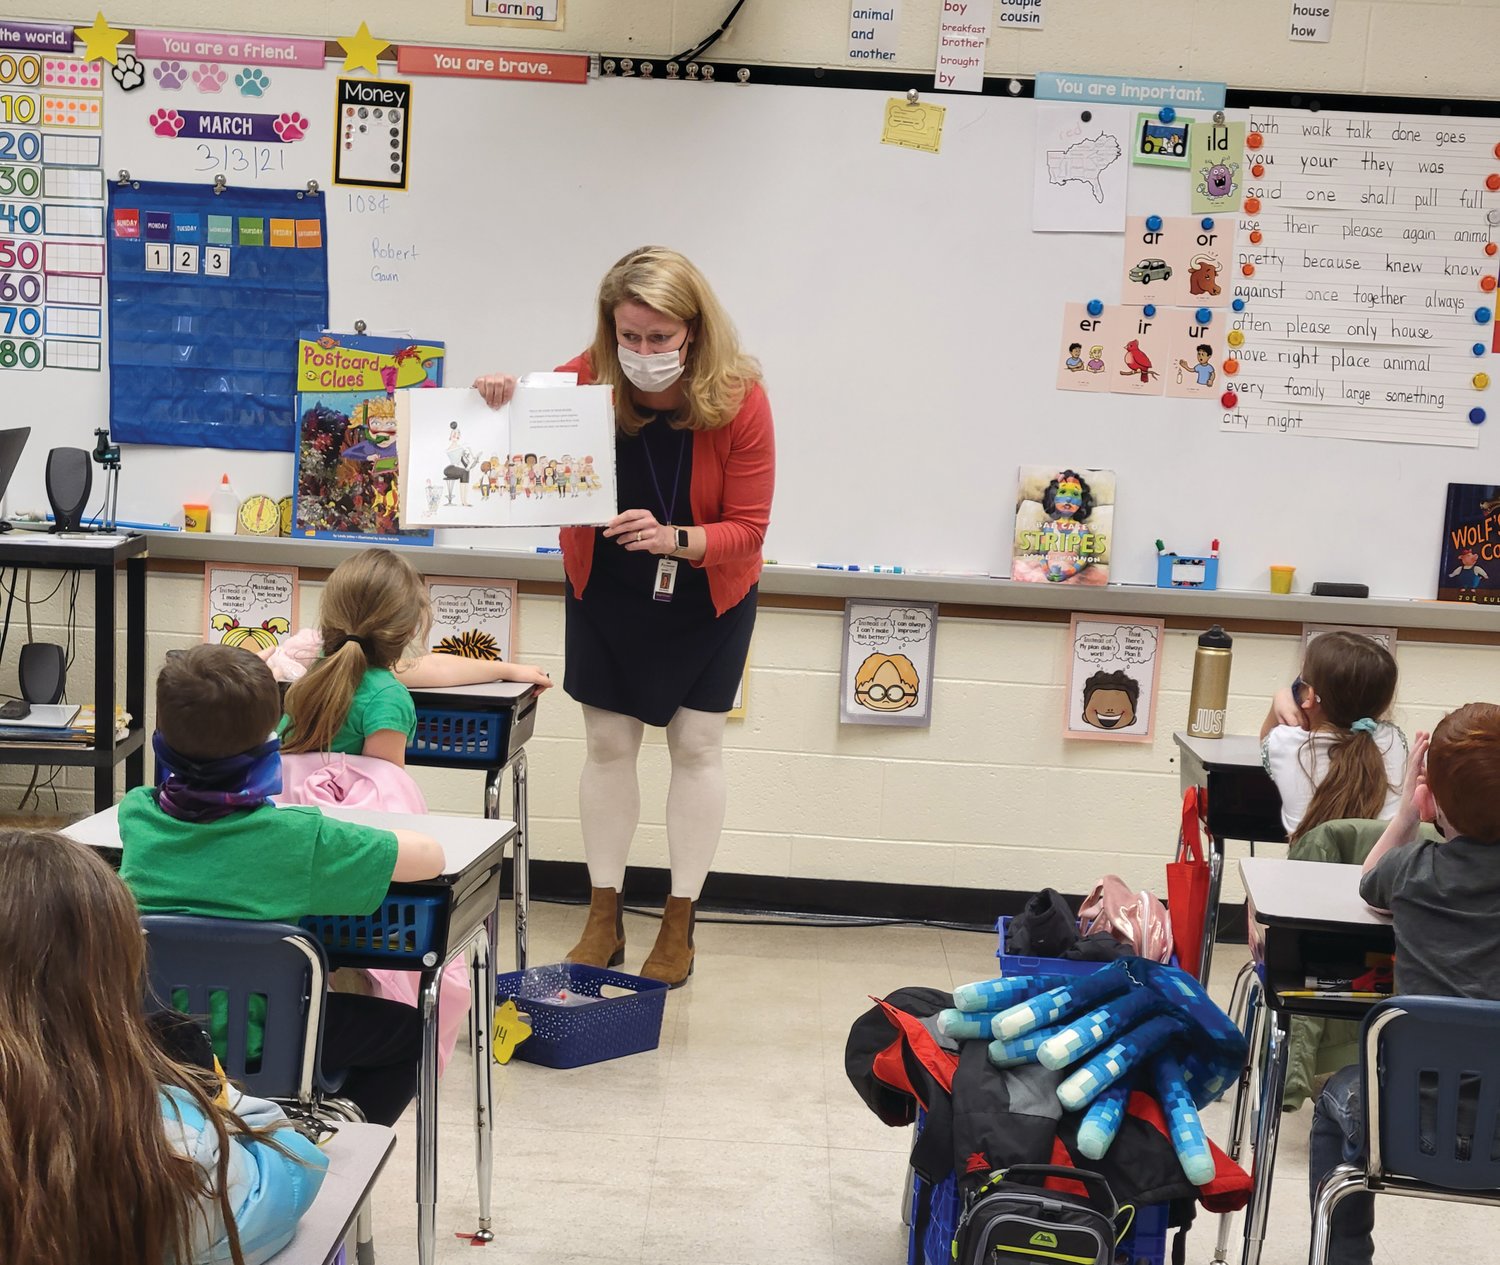 Dr. Bridget O’Connell, superintendent of the Palisades School District, has been named the 2022 Pennsylvania Superintendent of the Year by the Pennsylvania Association of School Administrators. She is photographed here reading to a class of young students at a Palisades school.